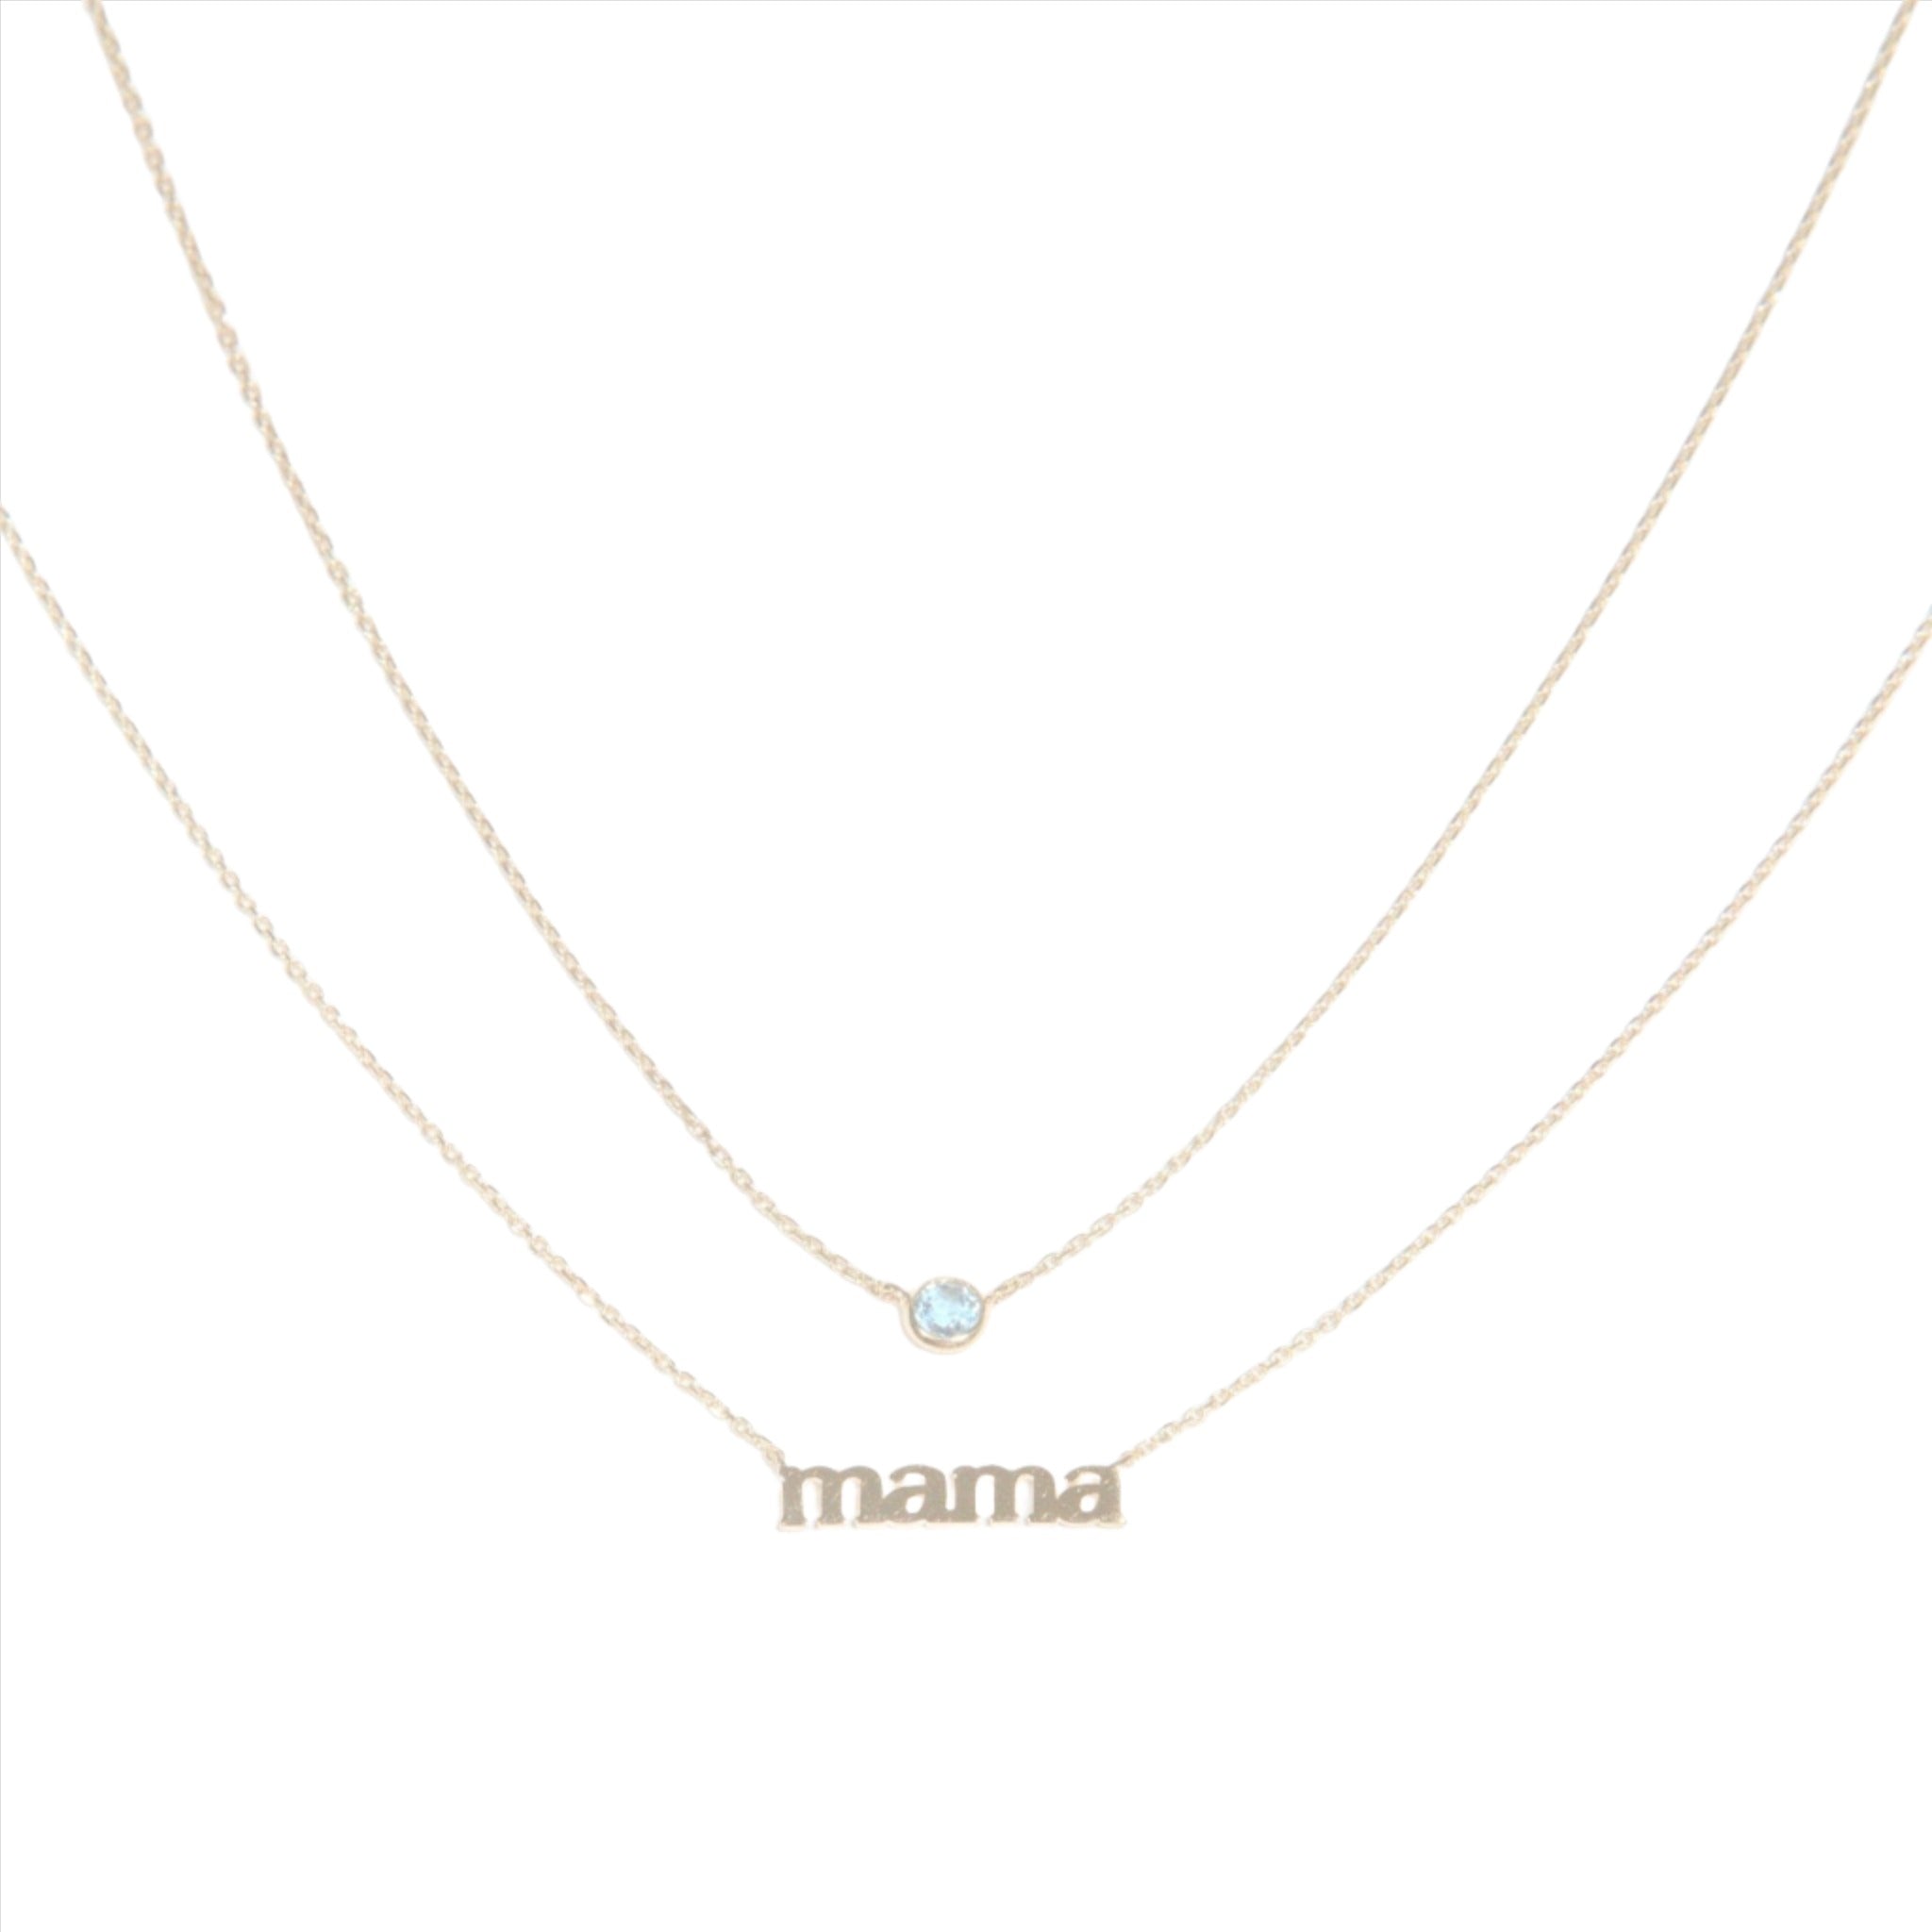 Mama Necklace in Solid 14k Yellow Gold Necklaces Estella Collection #product_description# 18625 new New Arrivals #tag4# #tag5# #tag6# #tag7# #tag8# #tag9# #tag10#